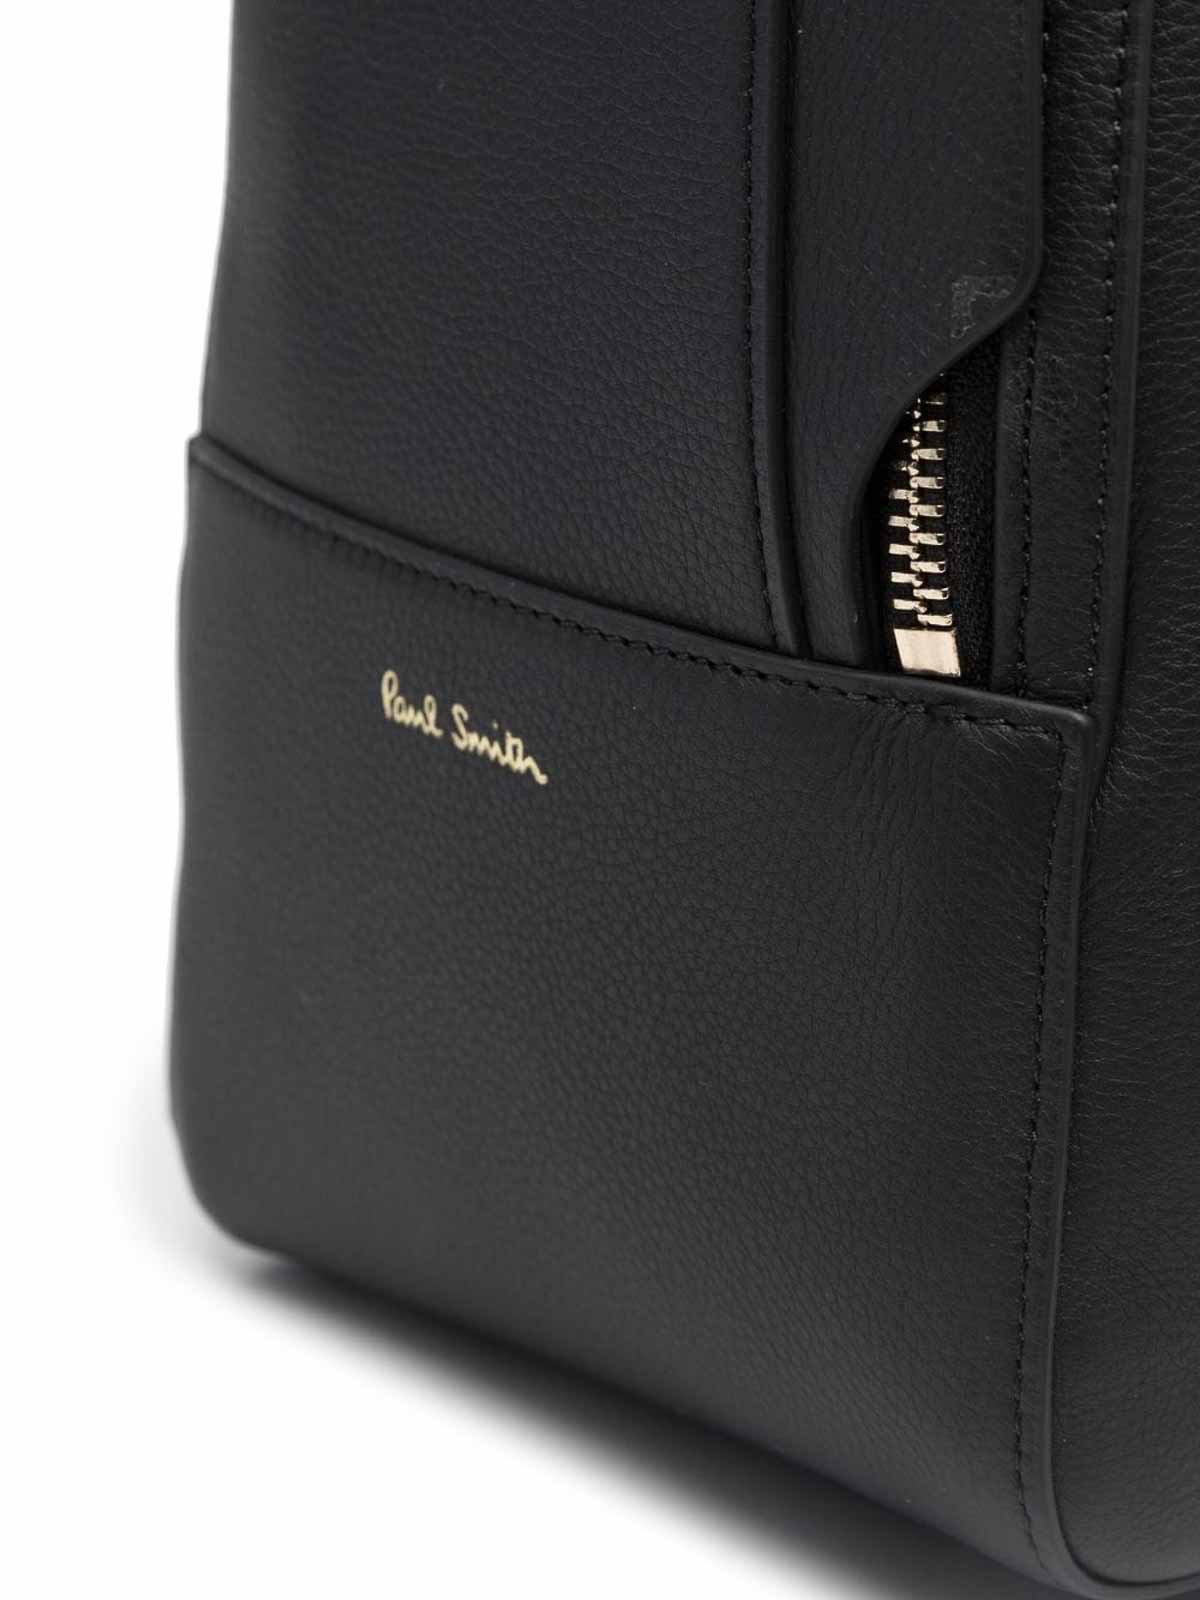 Paul Smith bags for Men